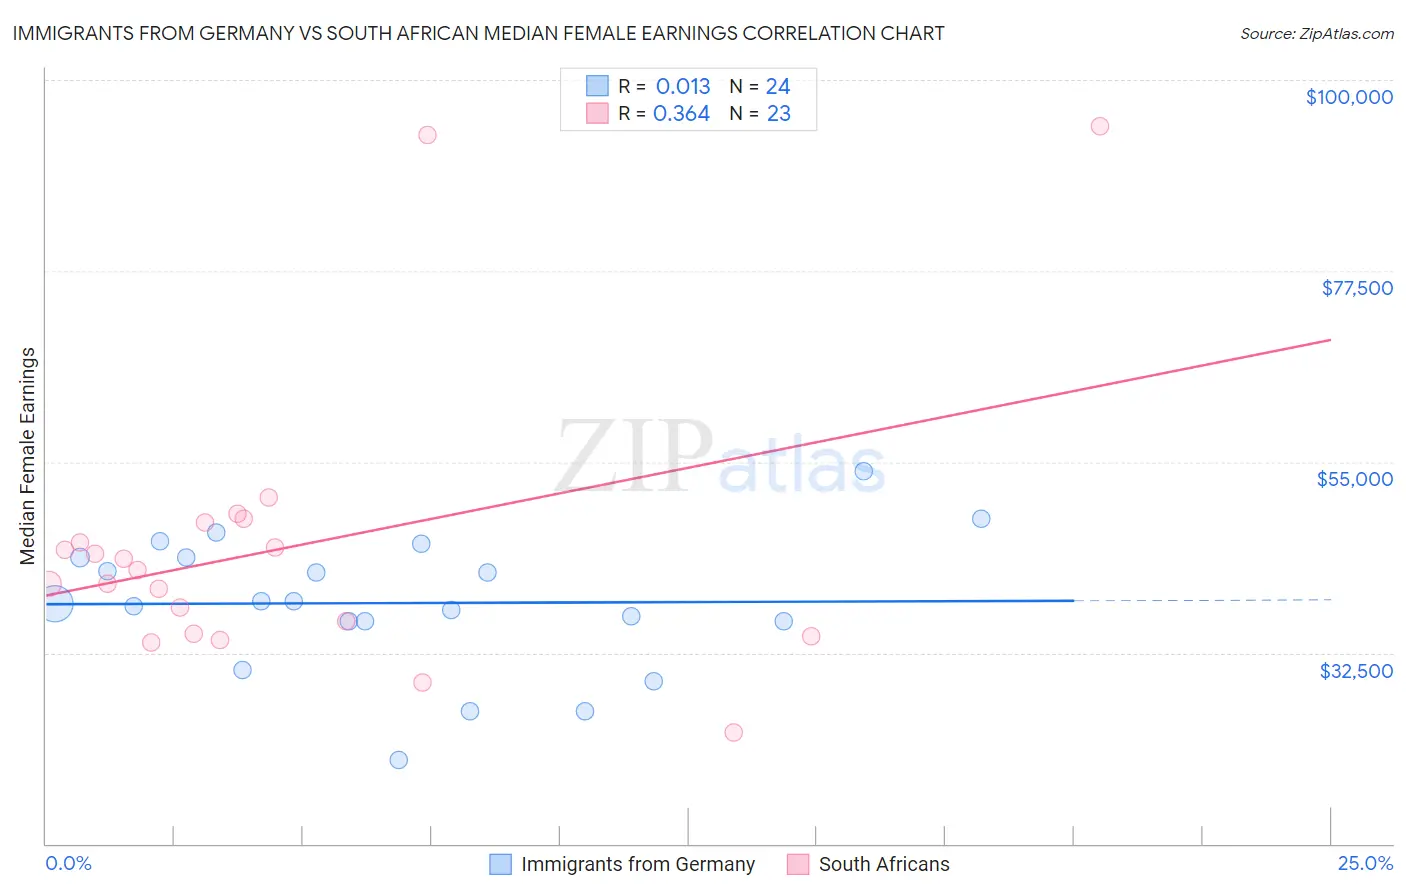 Immigrants from Germany vs South African Median Female Earnings